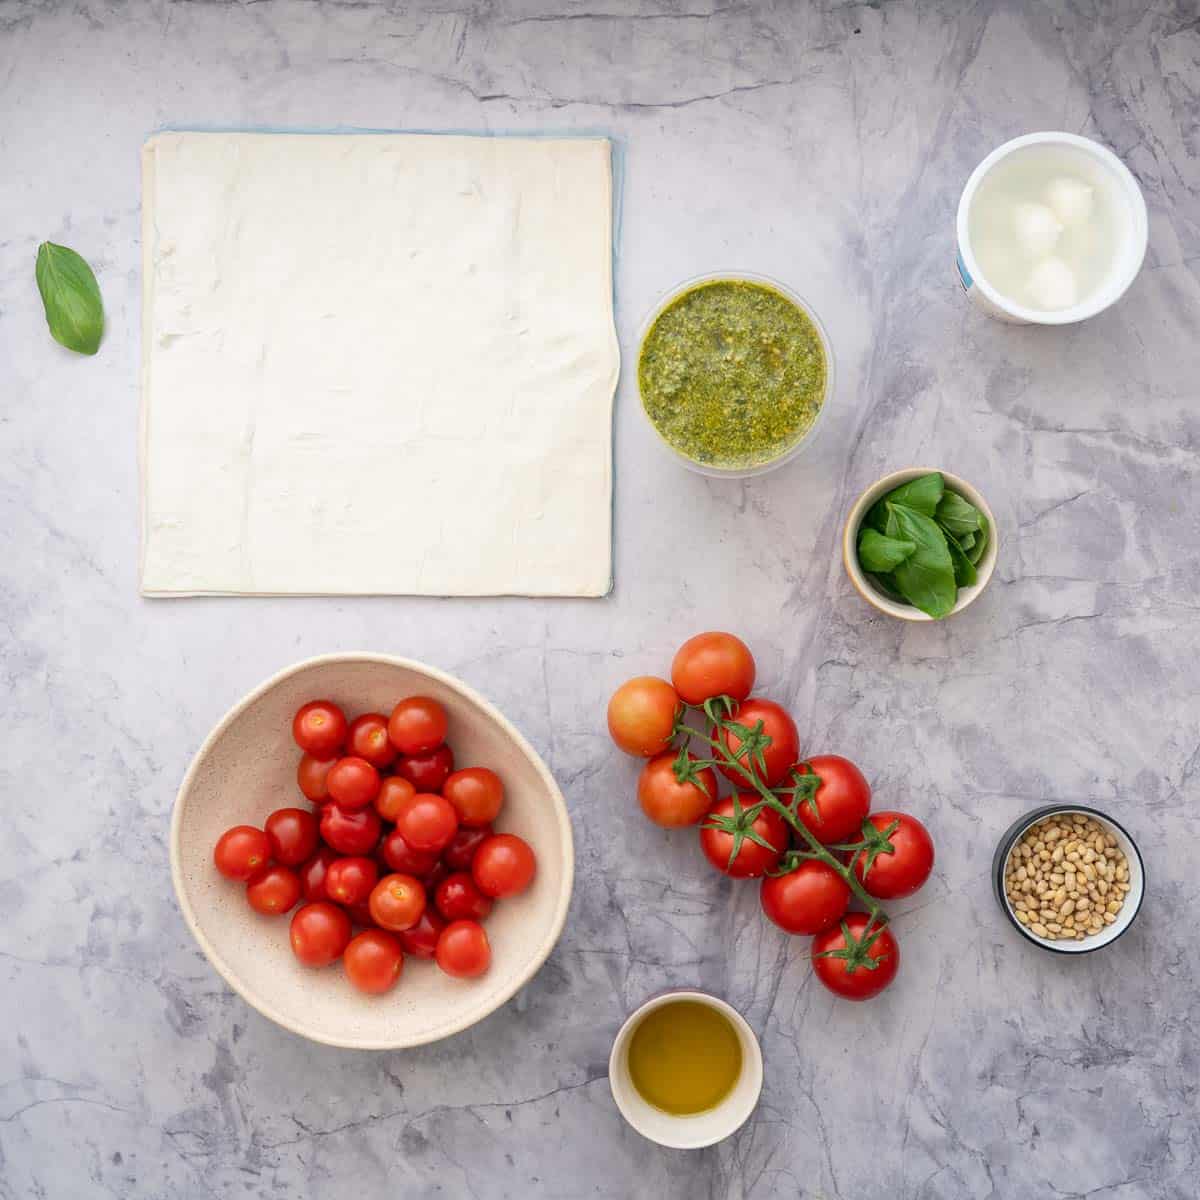 ingredients for the Tomato Tart laidout on the bench - one sheet of puff pastry, tomatoes, pesto, pine nuts, cheese and basil 